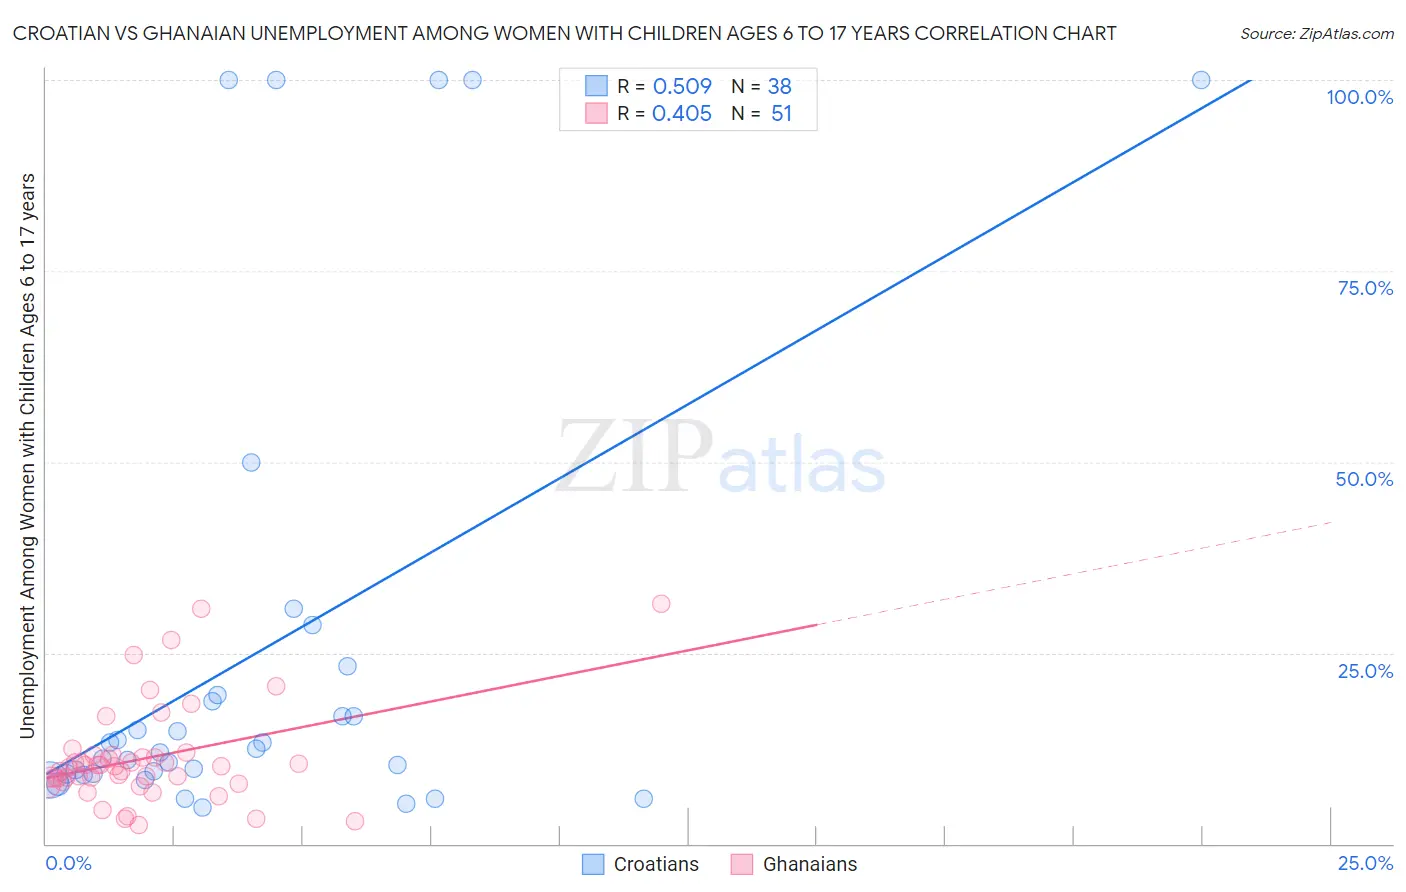 Croatian vs Ghanaian Unemployment Among Women with Children Ages 6 to 17 years